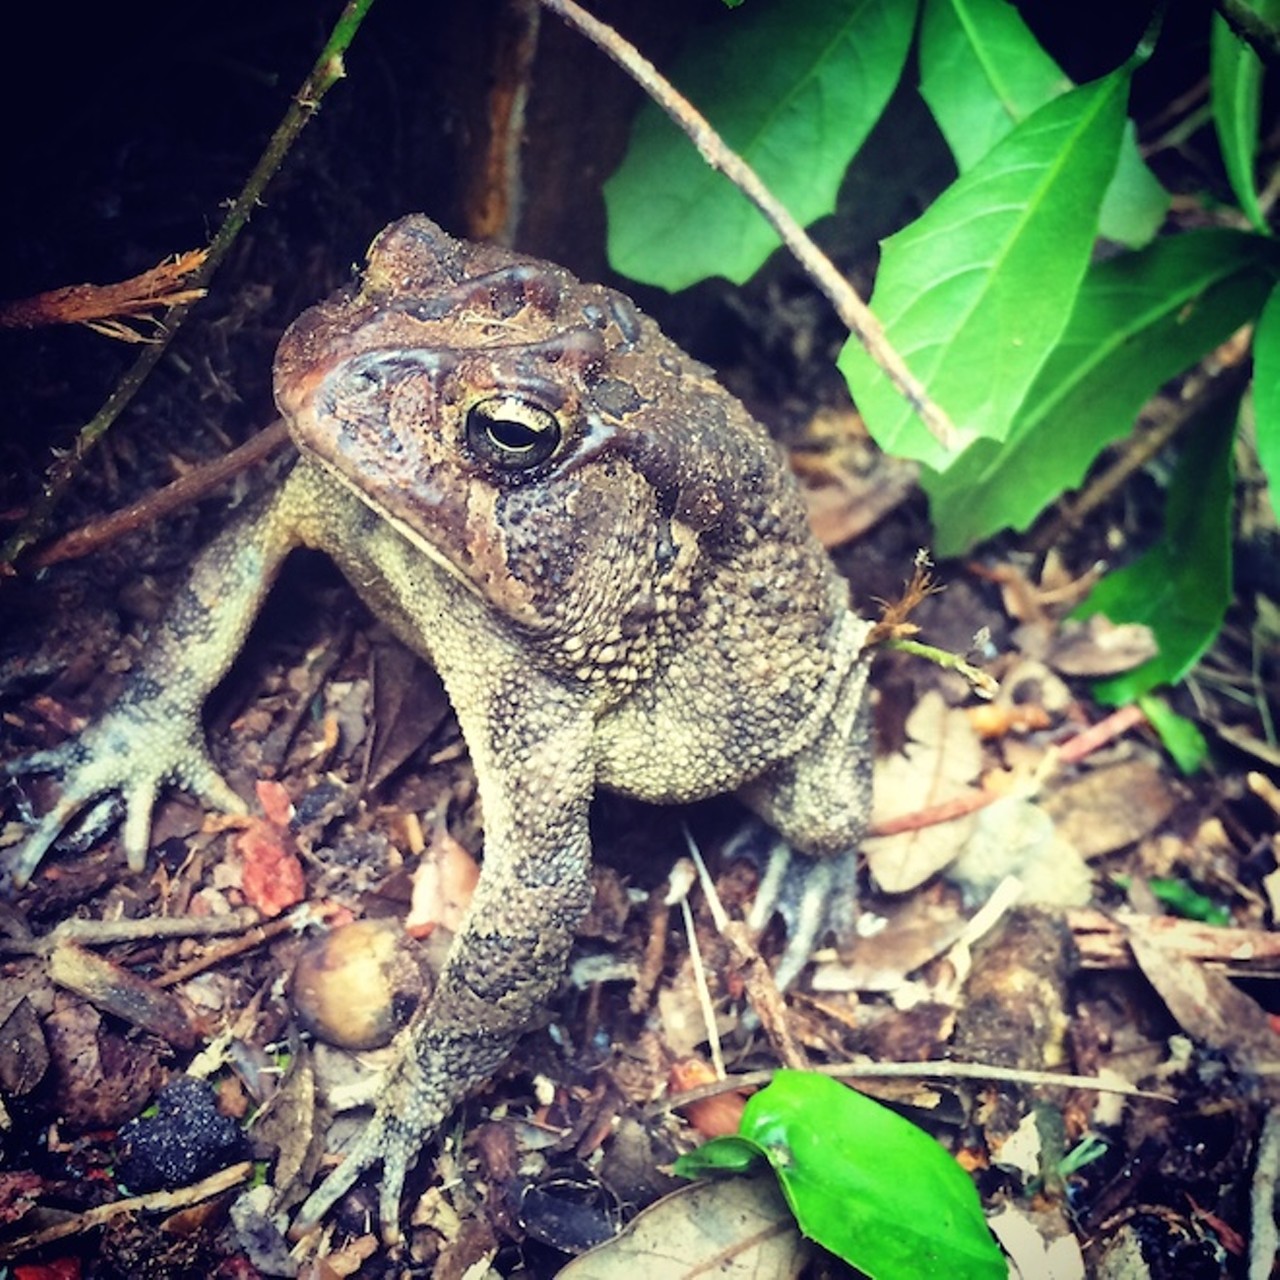 A giant toad hanging out after the rain